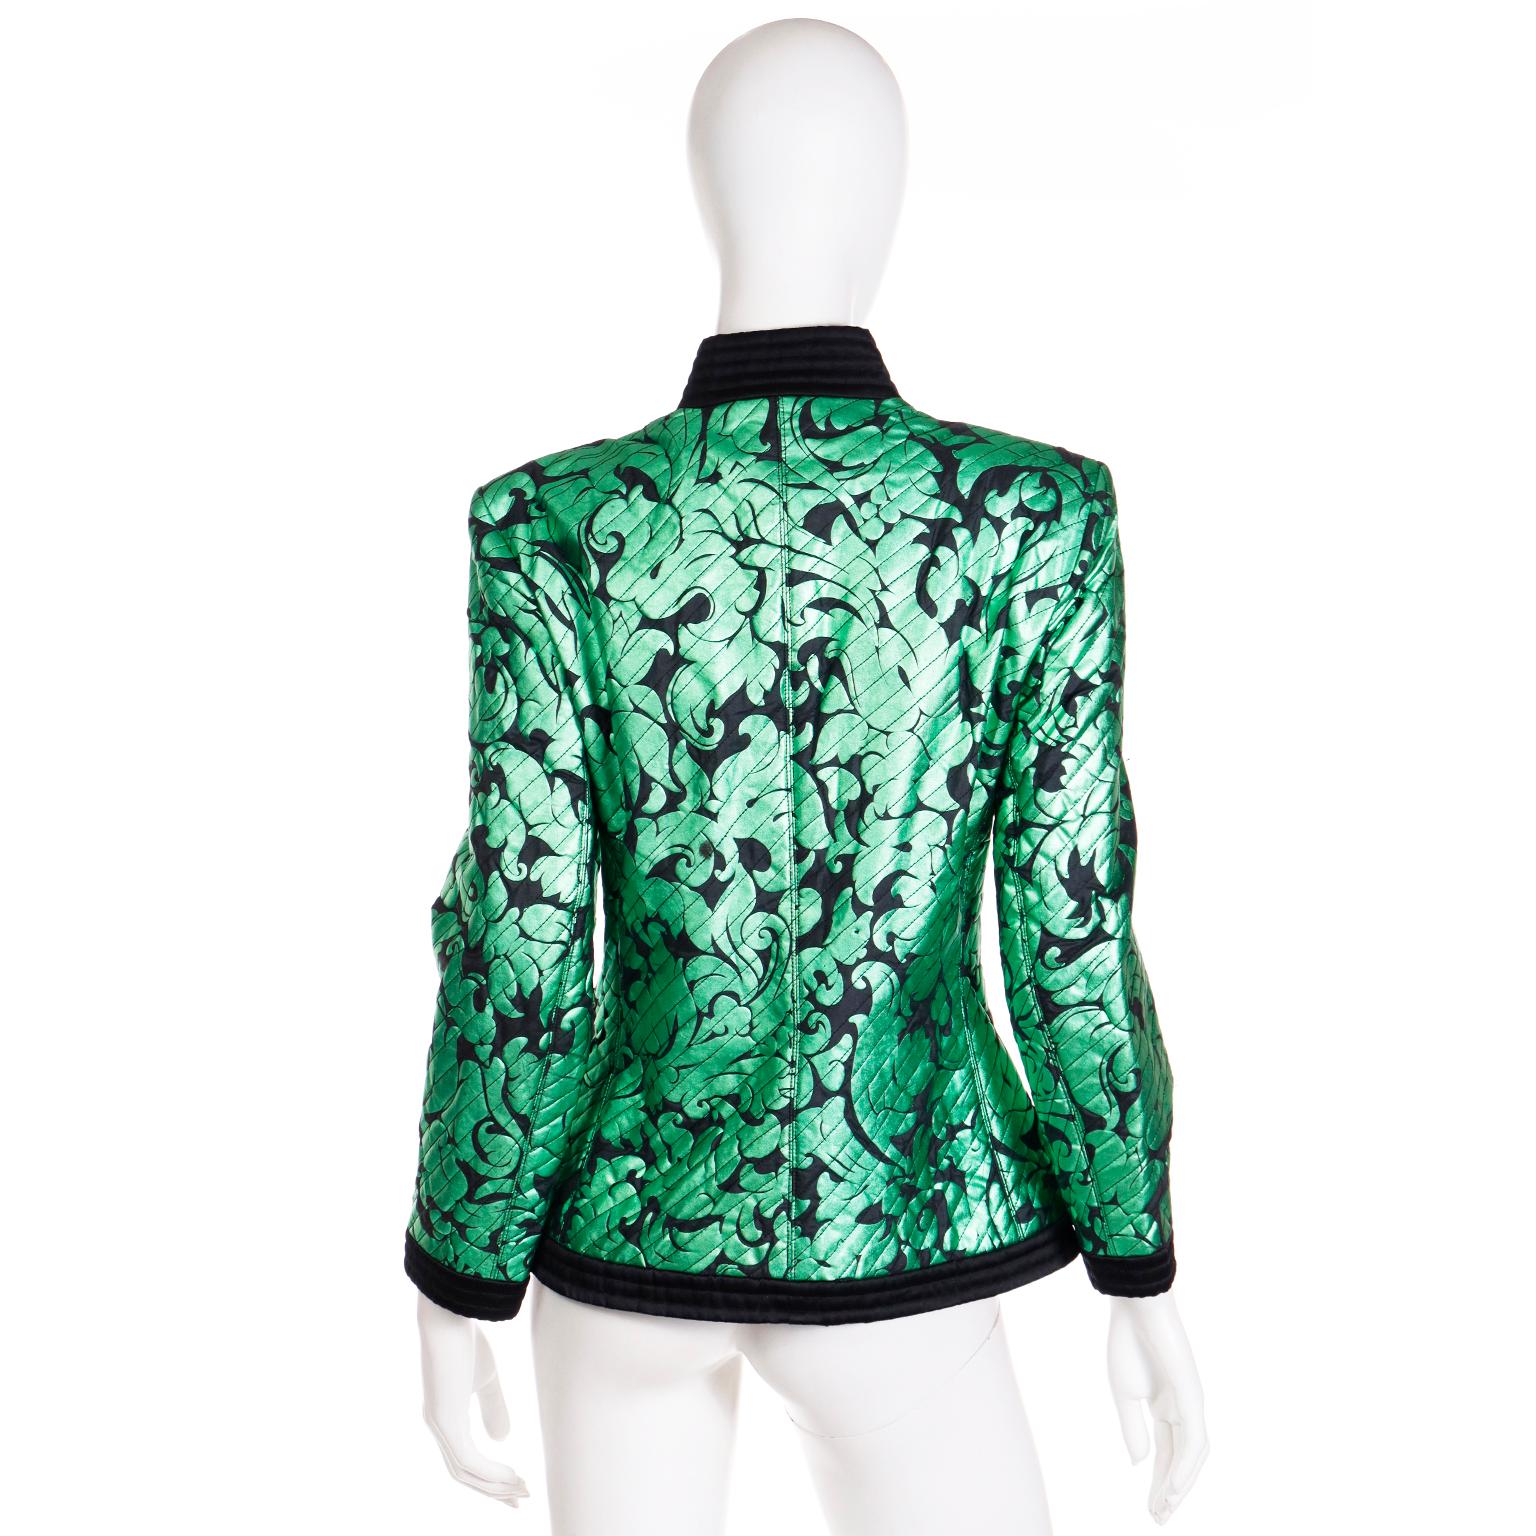 Yves Saint Laurent F/W 1986 / 87 Green Lame Jacket with Quilted Black Satin Trim 1